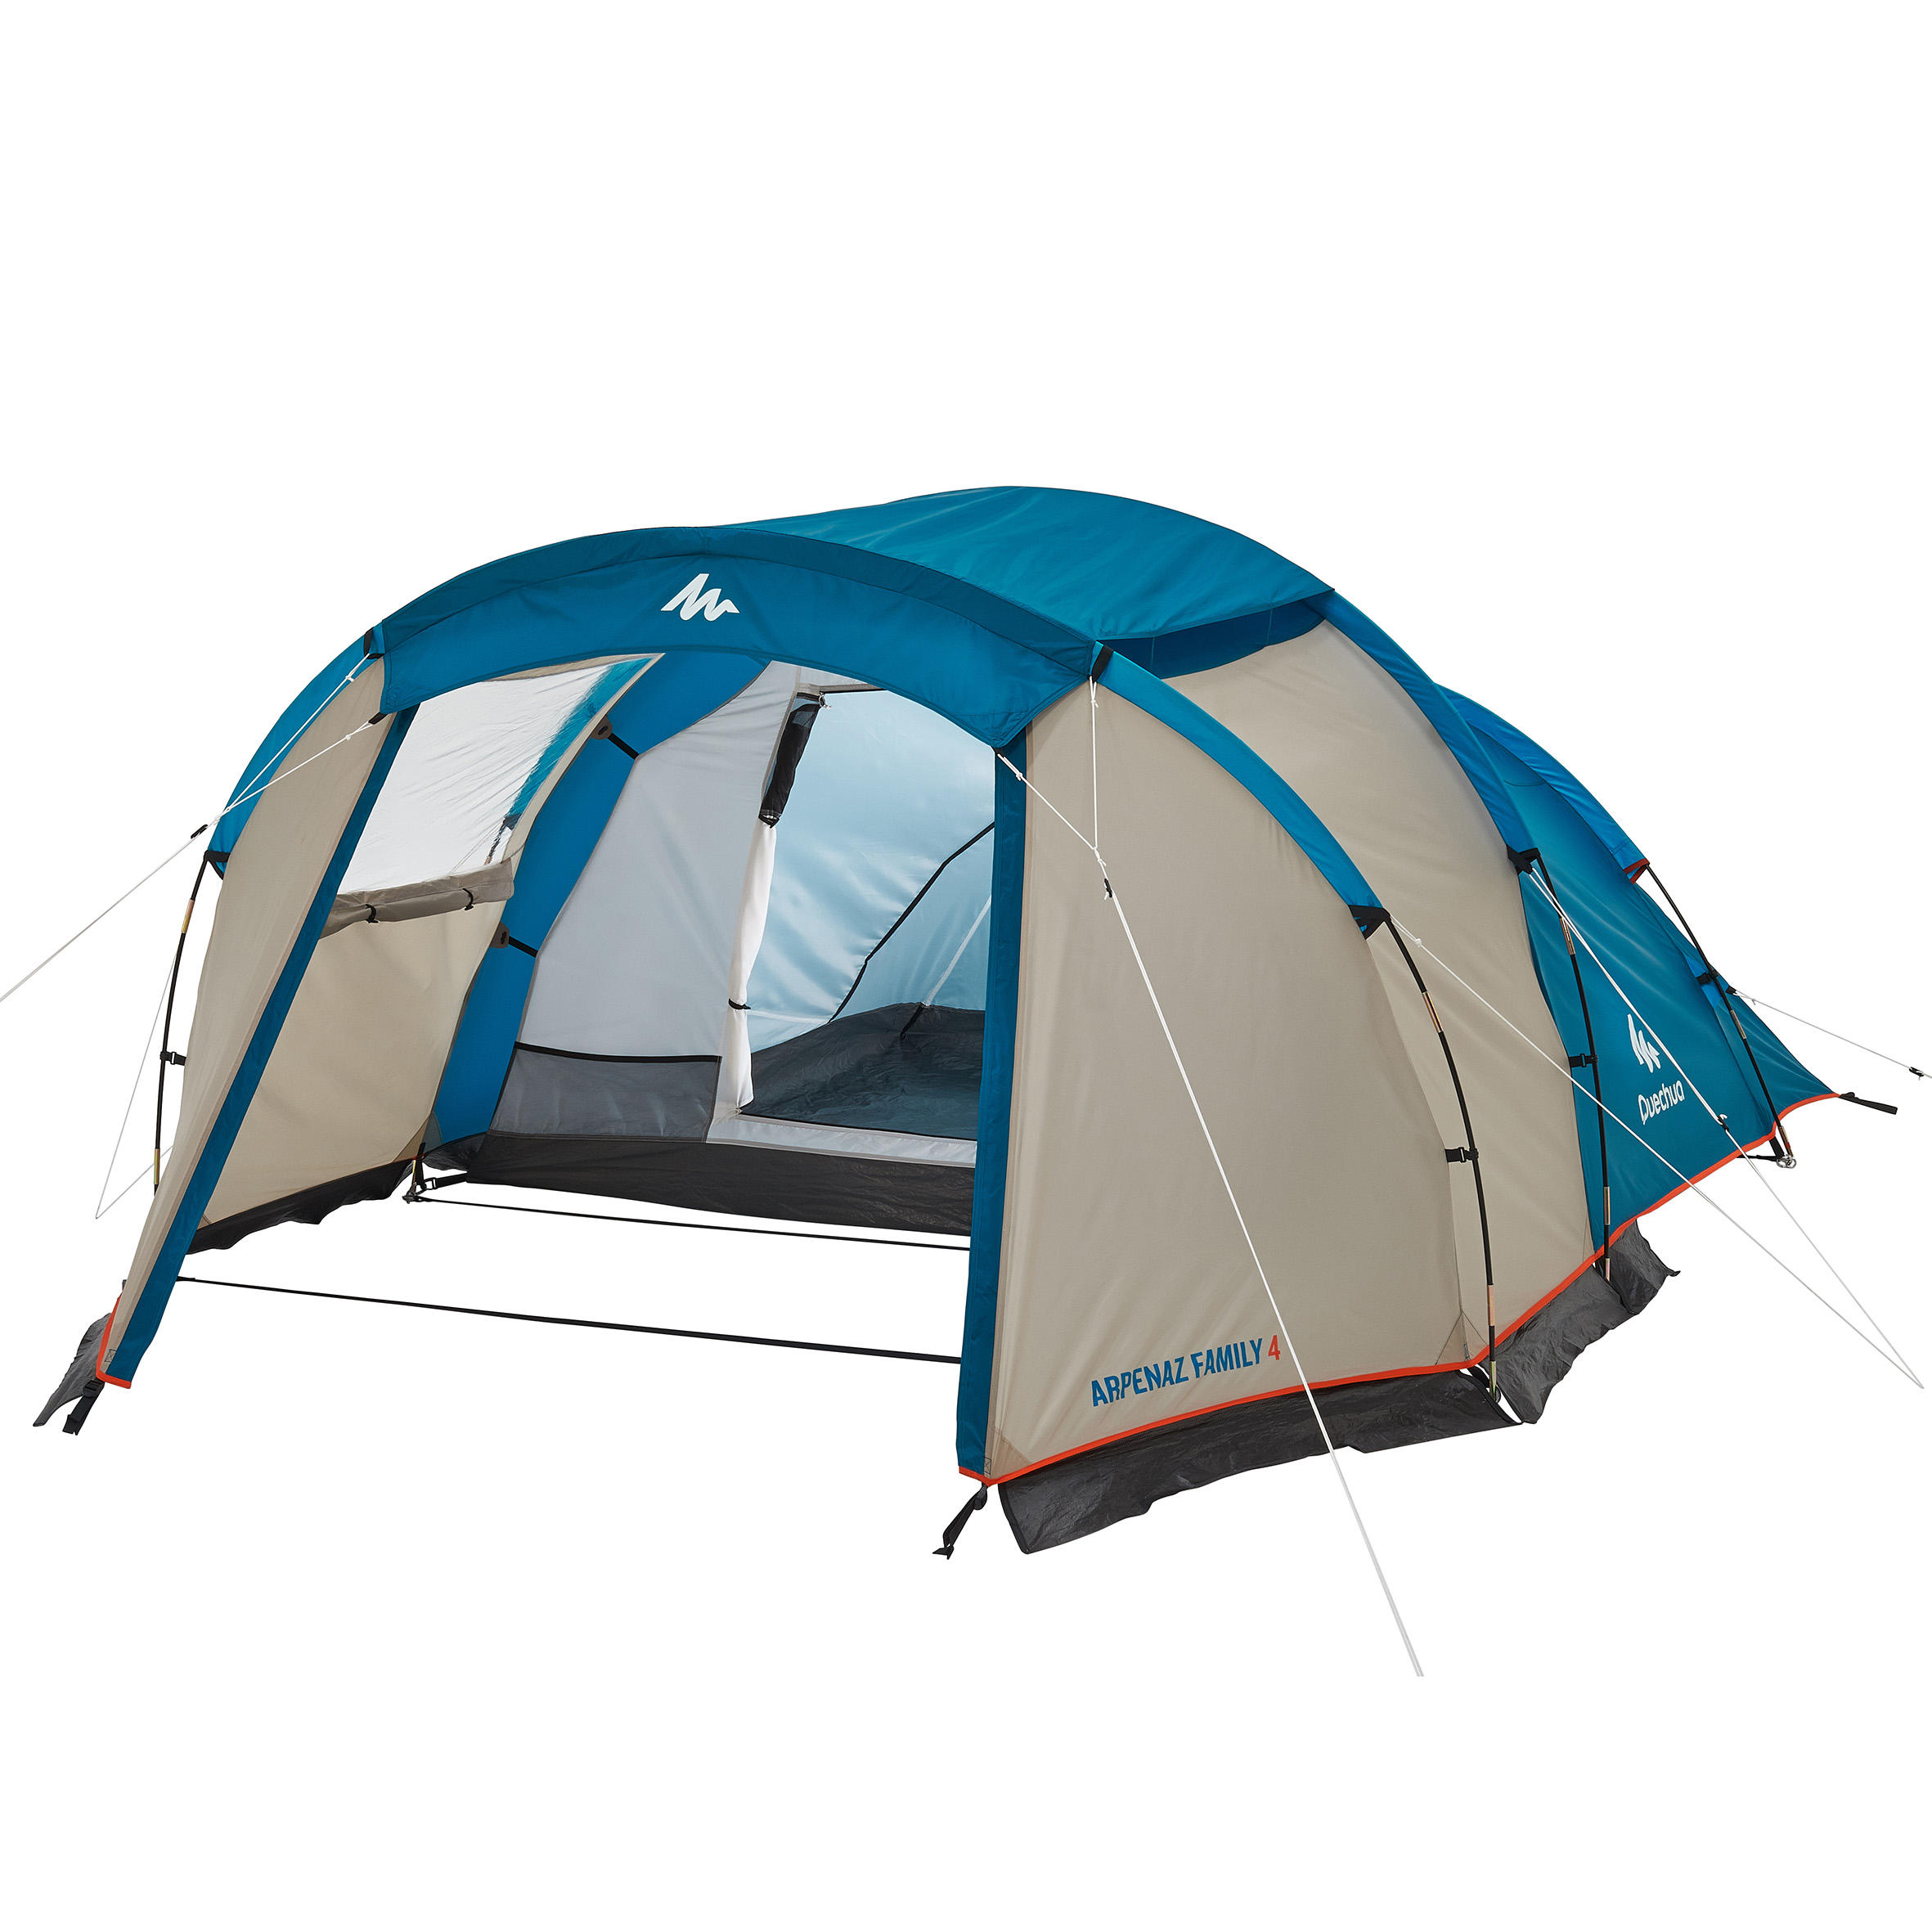 4 Person 1 Bedroom Camping Tent|Camping 